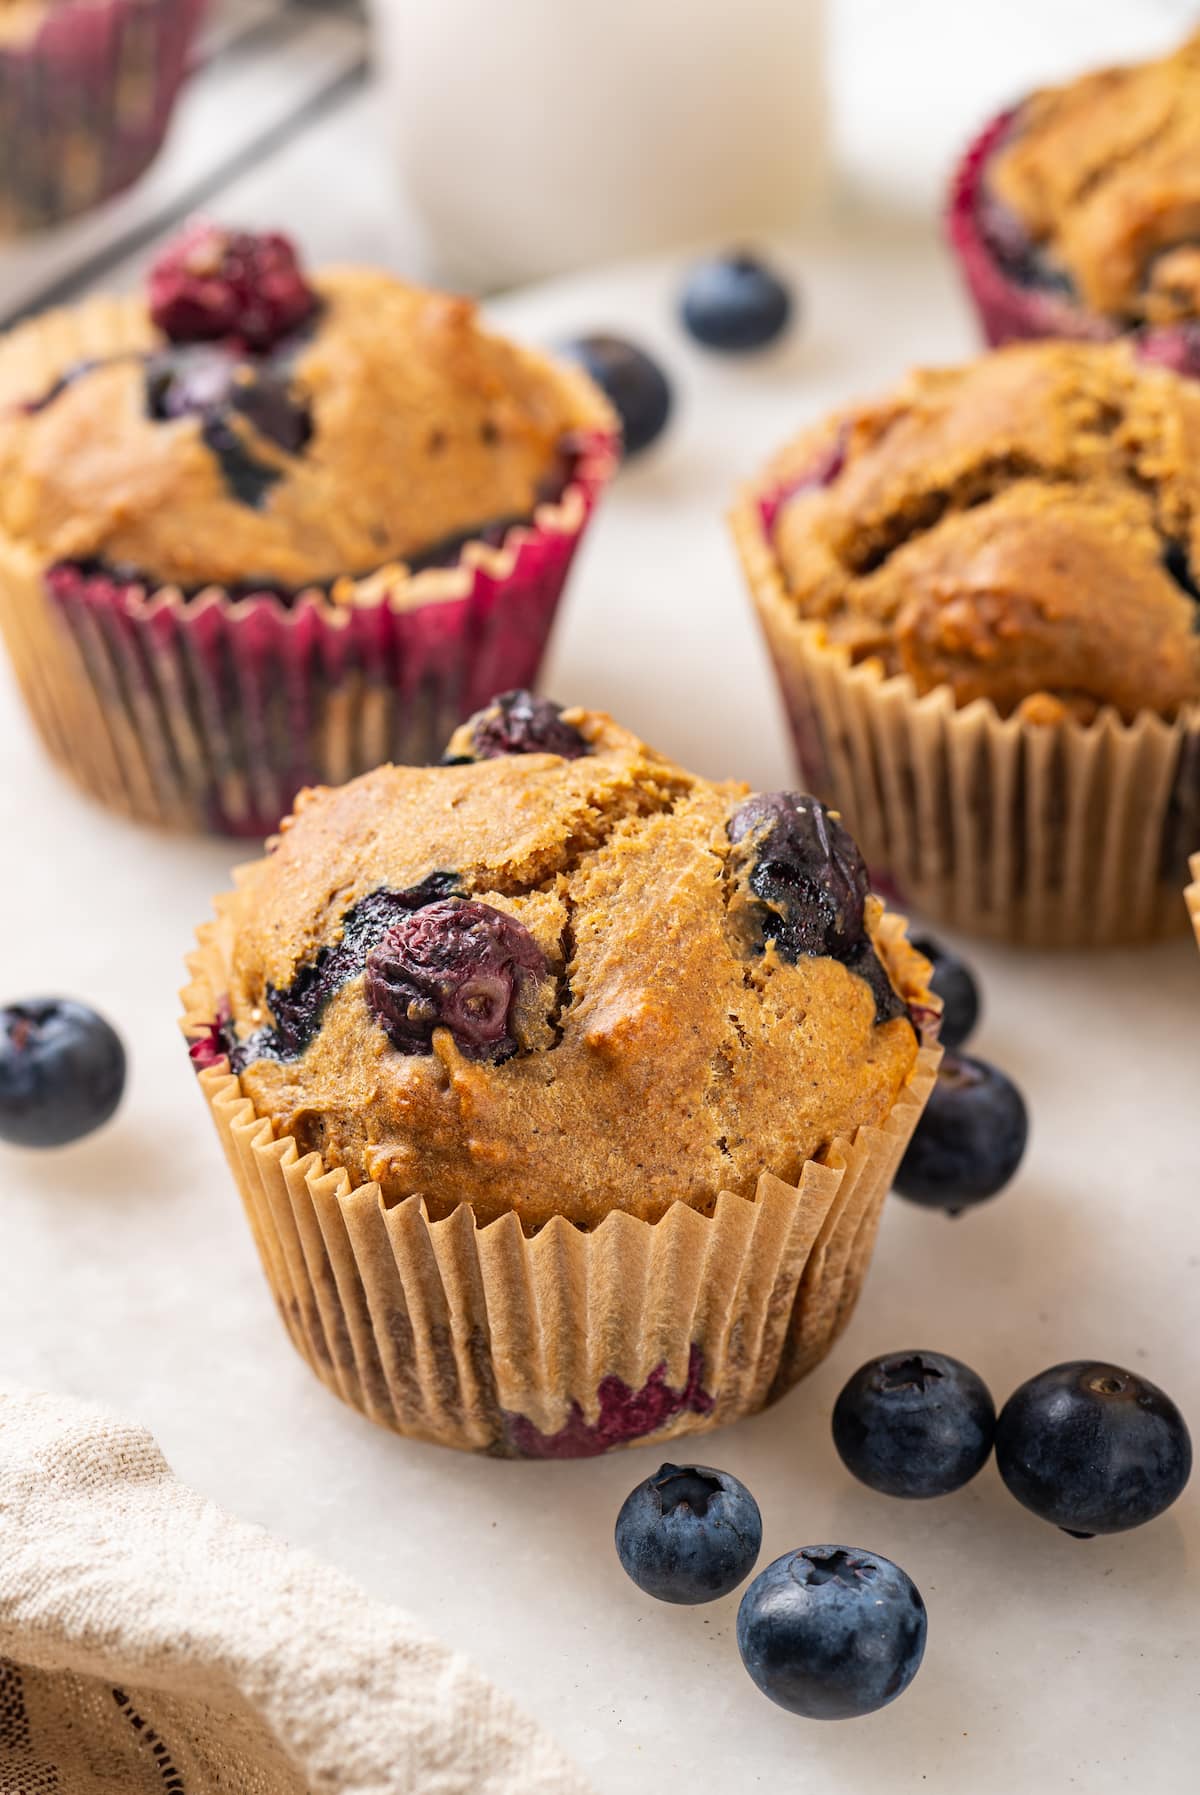 Blueberry muffin made with whole wheat pastry flour, with additional muffins in background